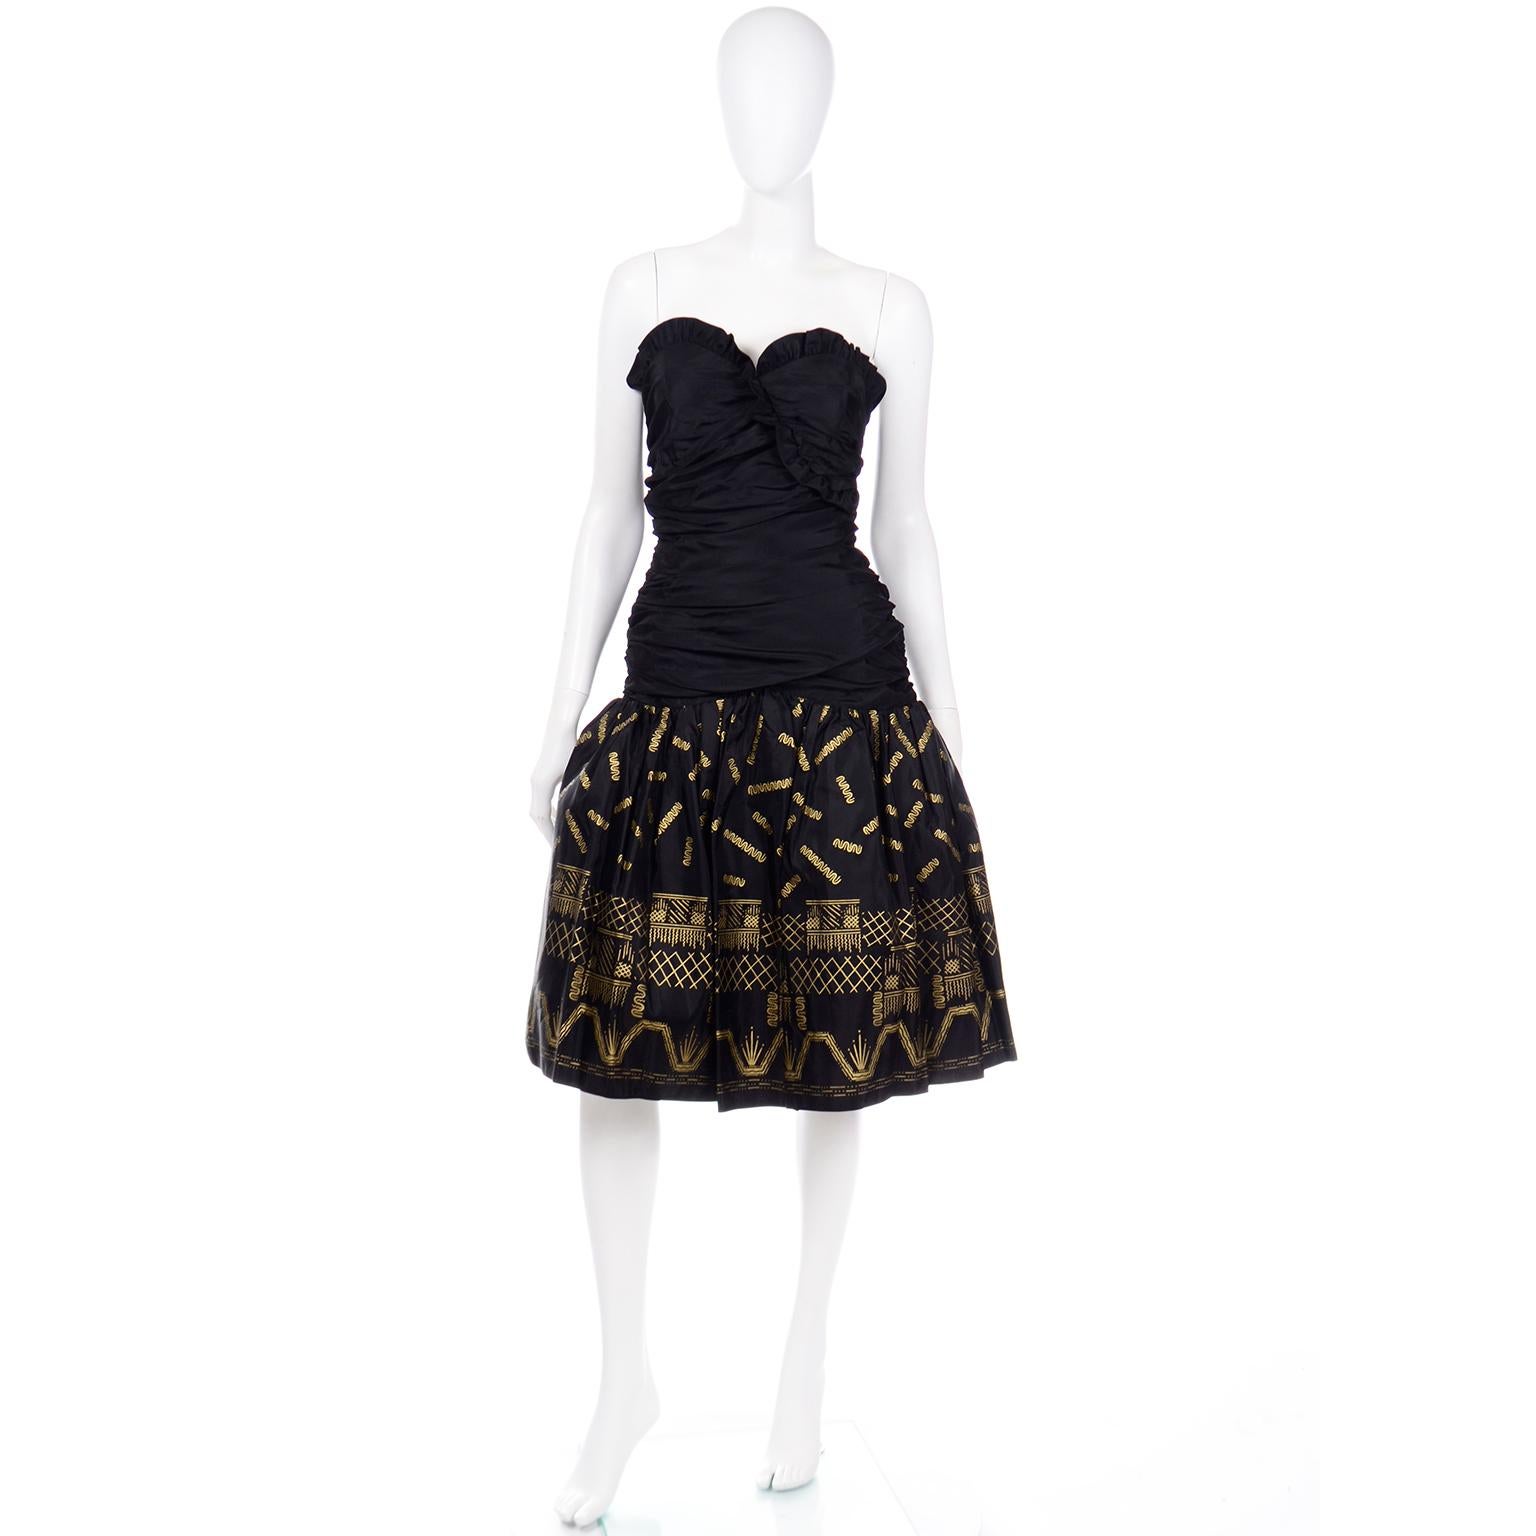 This is a fun vintage Zandra Rhodes evening dress from the 1980's in black taffeta with fully ruched sides and back, a ruffled sweetheart neckline and a drop waist. We love the gorgeous Zandra Rhodes signature gold stencil design on the tulle lined